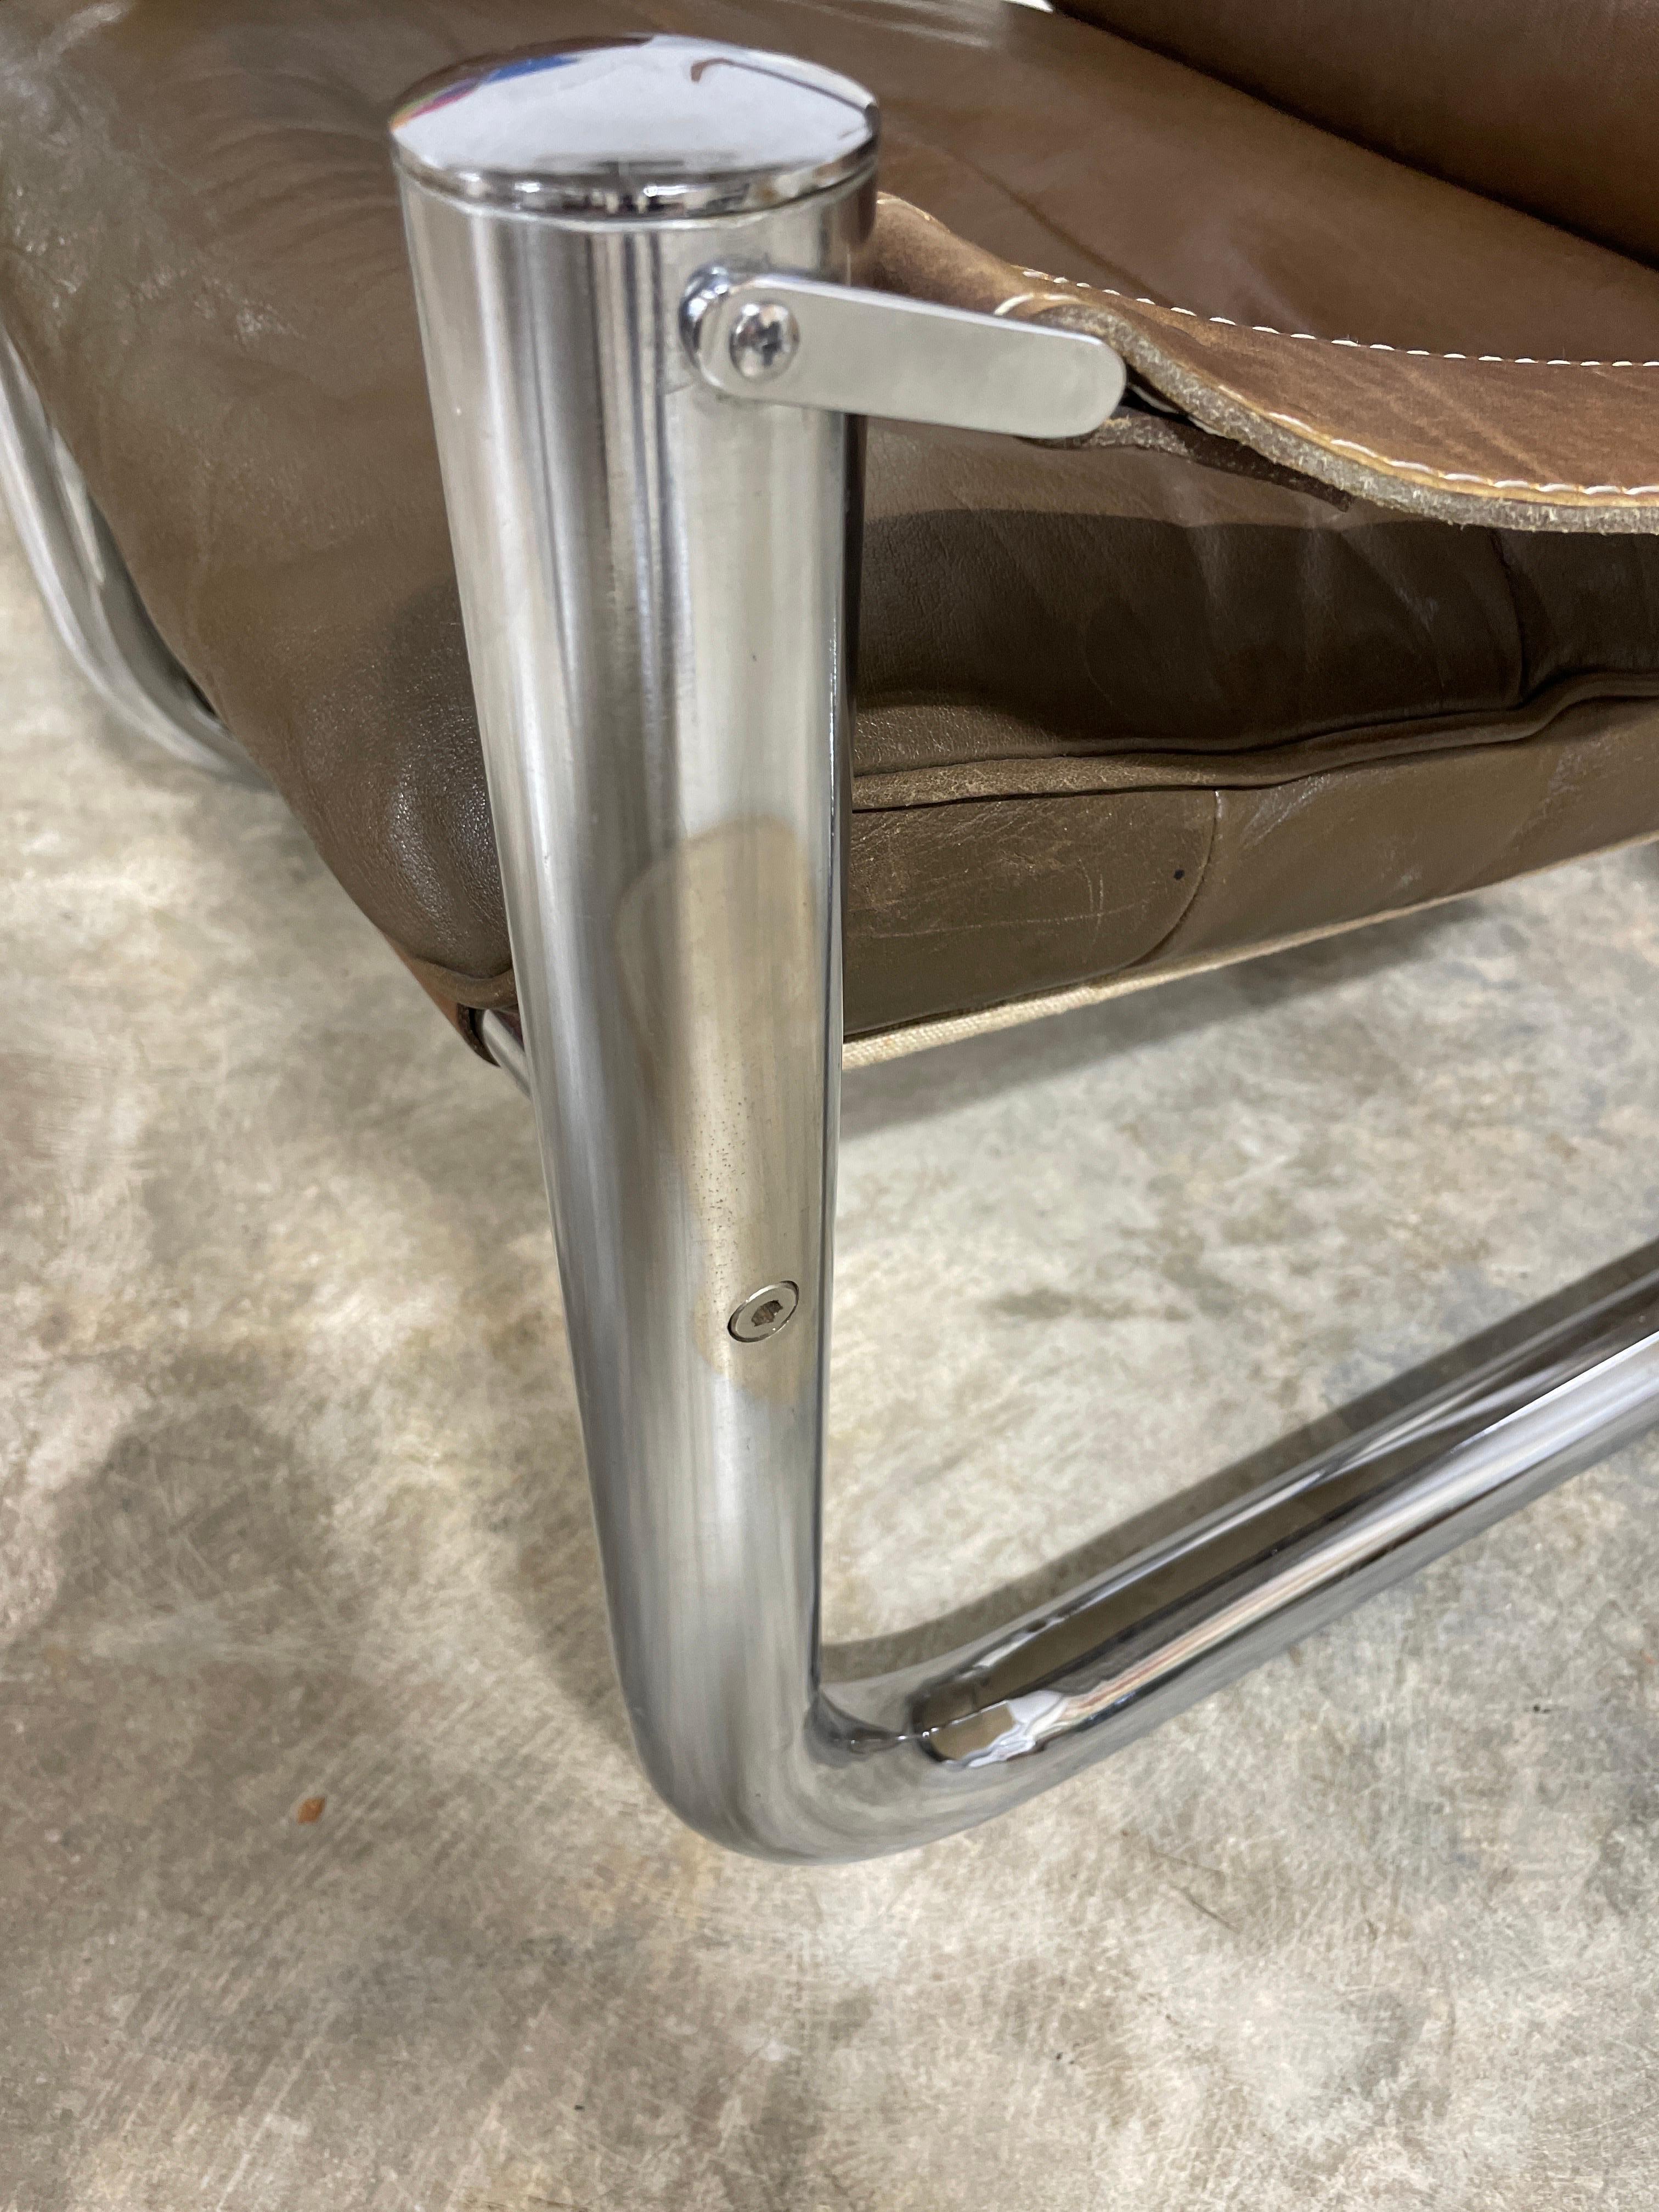 Arne Norell Leather and Chrome Tubular Safari Danish Mid-Century Modern Chair In Good Condition For Sale In Fort Lauderdale, FL